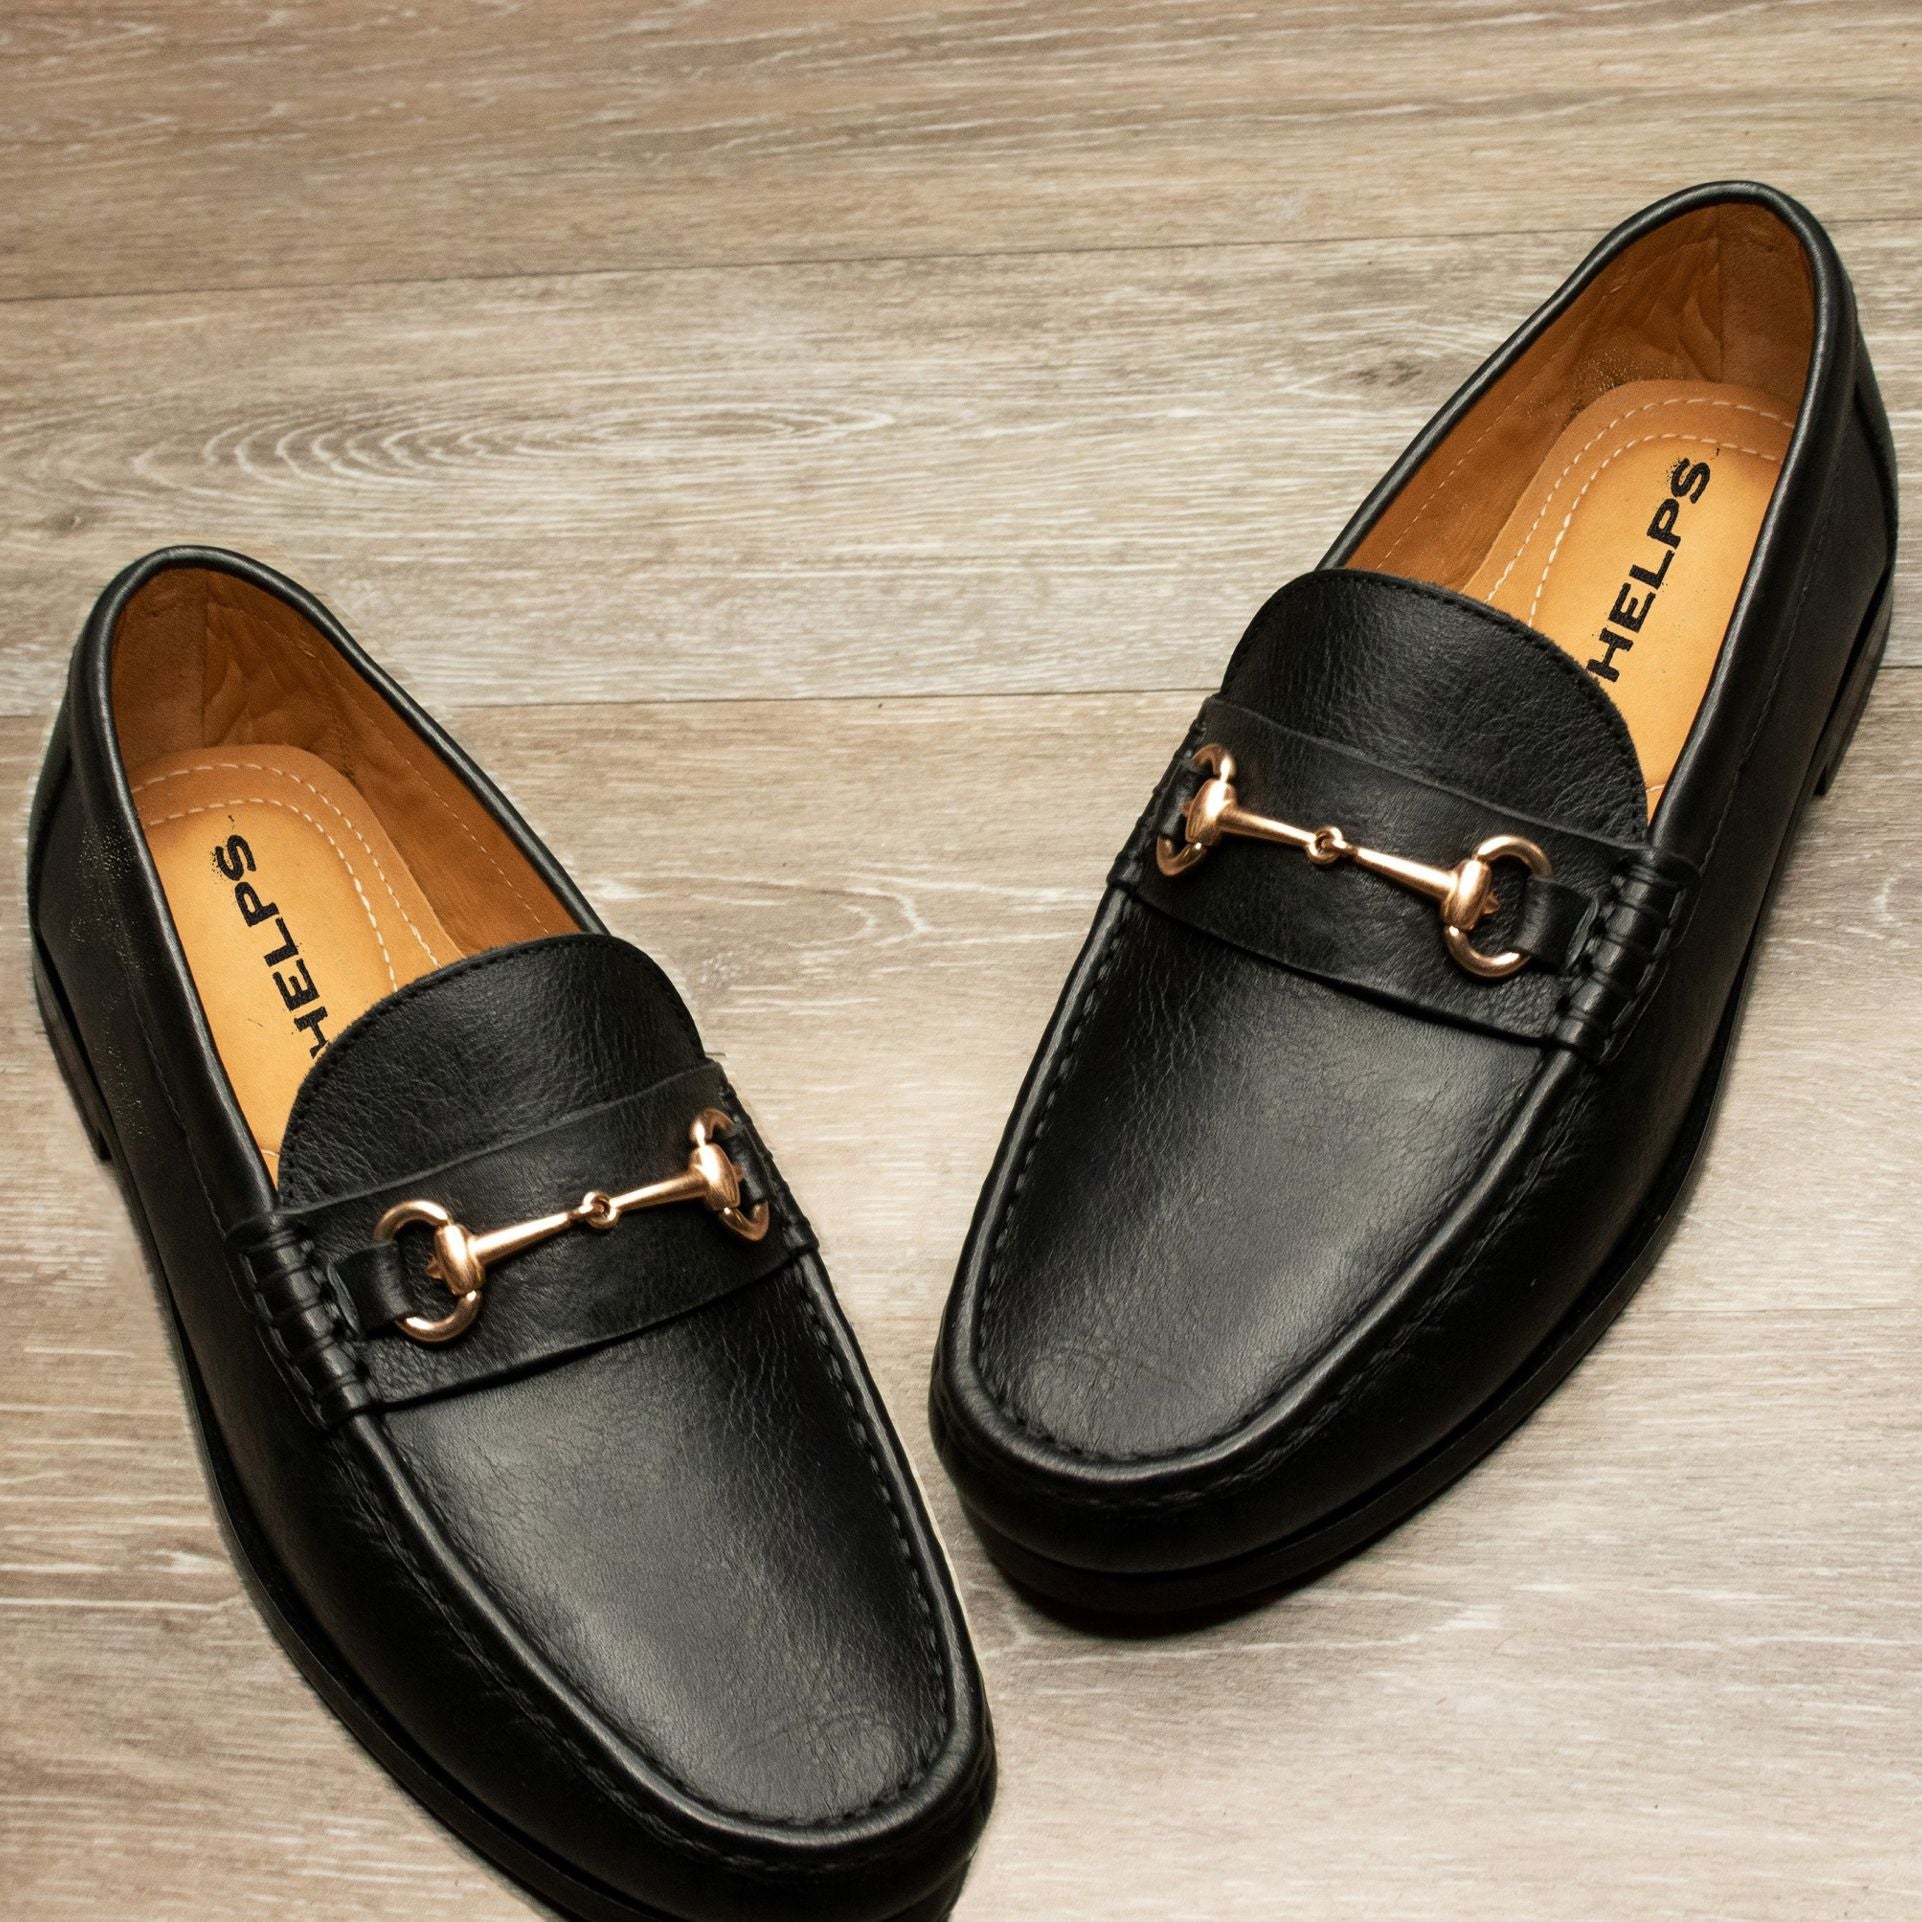 Phelps Interchangeable 'Bridge Bits' Tubular English Moccasin Loafer in Black Calfskin by T.B. Phelps